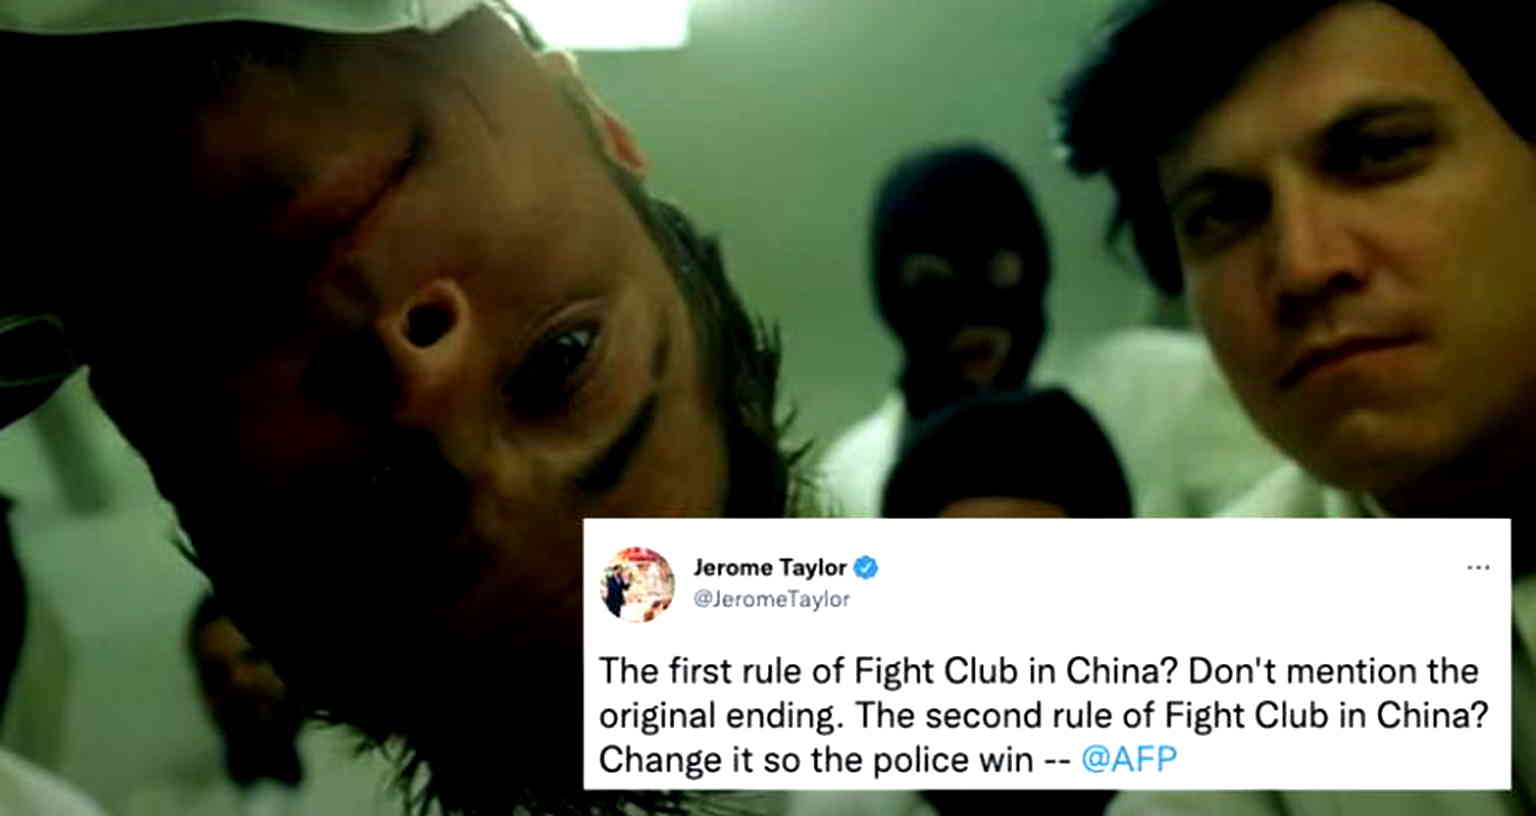 ‘Fight Club’ can now be streamed in China — with an altered ending where the authorities win